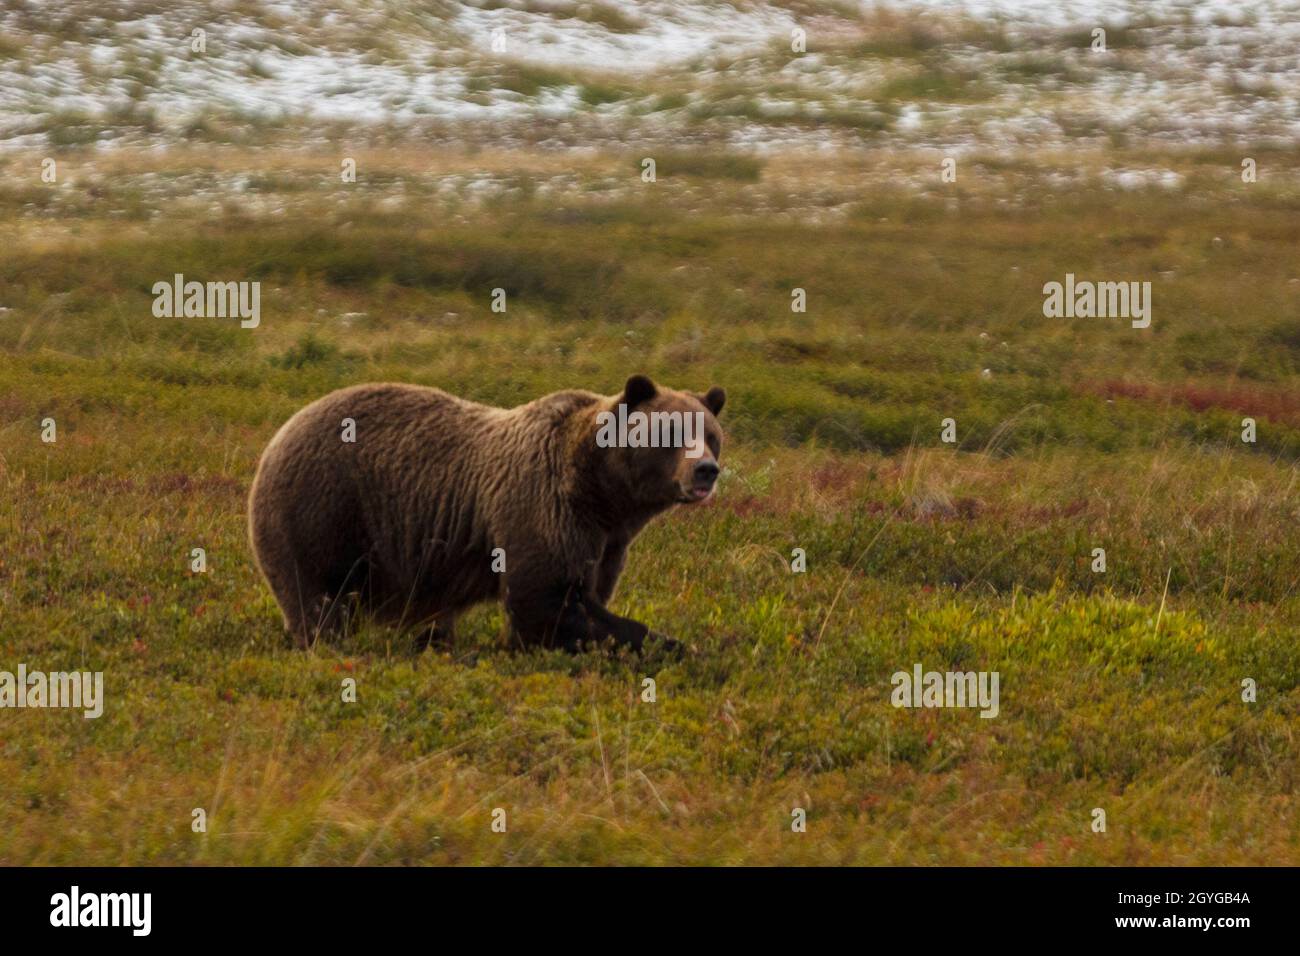 A GRIZZLY BEAR (Ursus arctos horribilis) forages for berries in the tundra - DENALI NATIONAL PARK, ALASKA Stock Photo